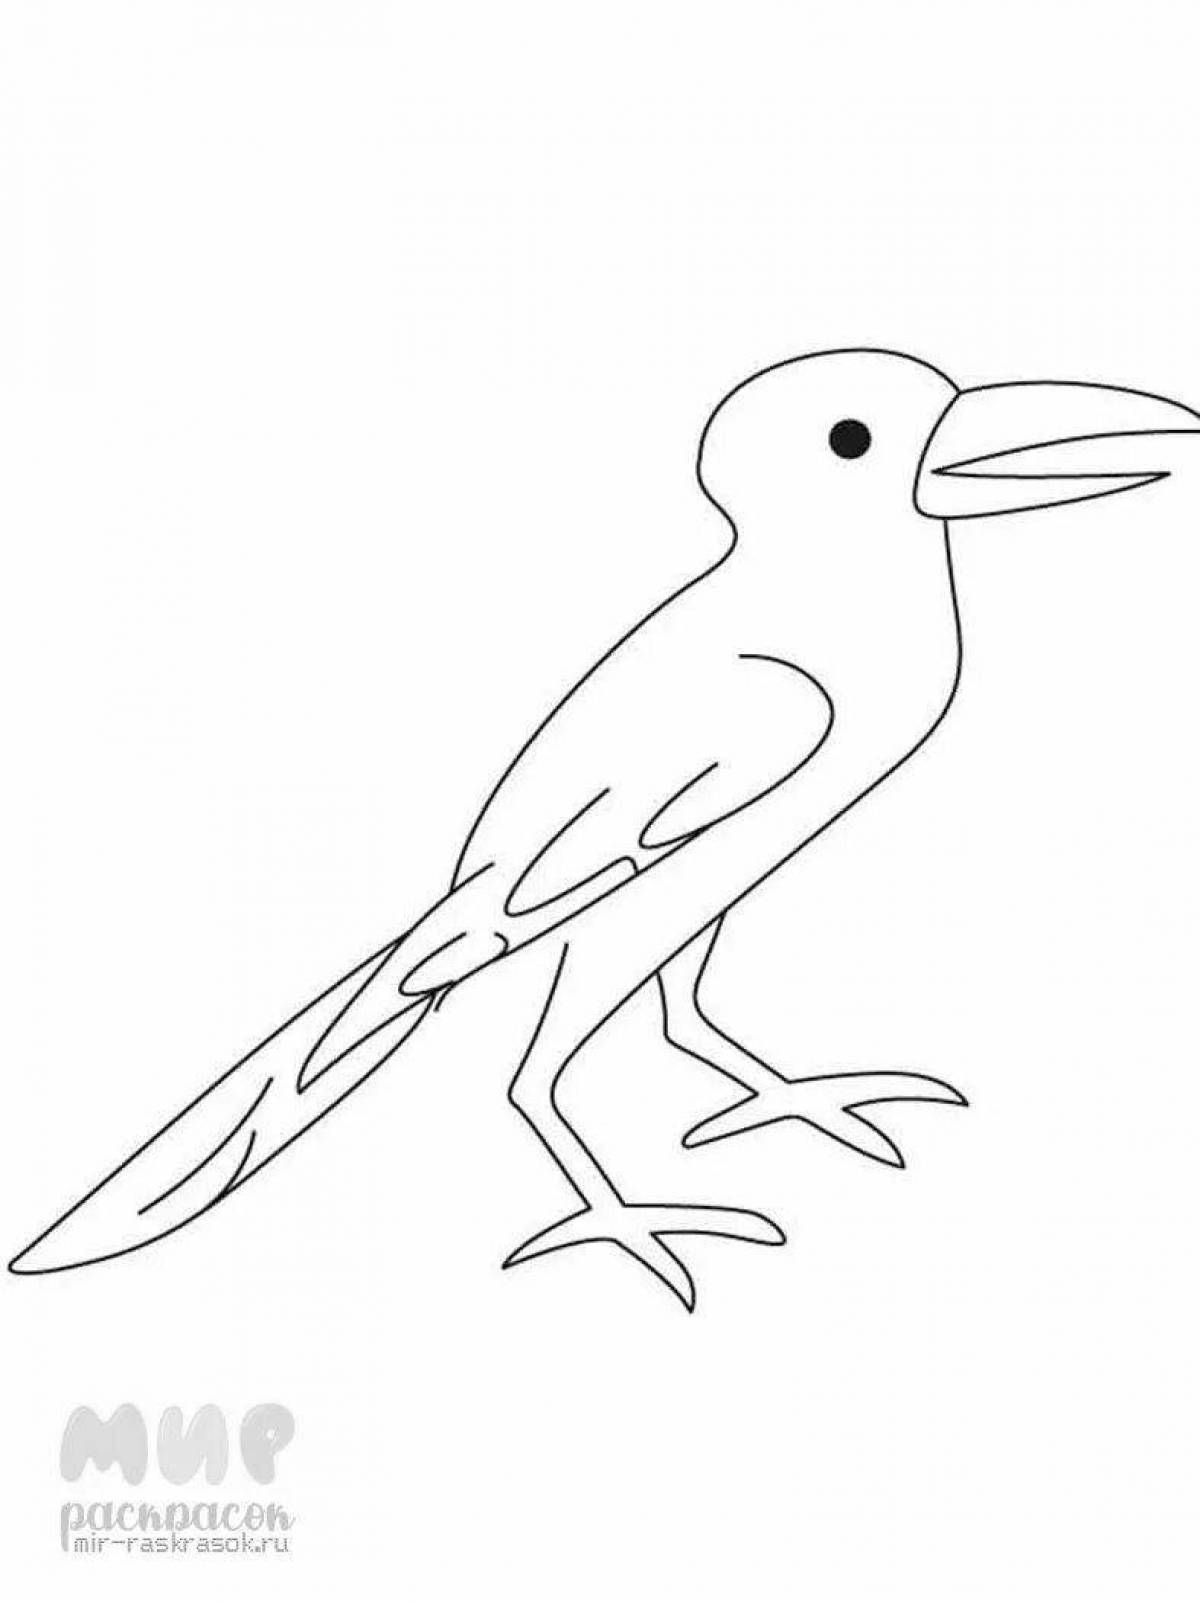 Distinctive crow coloring page for 3-4 year olds